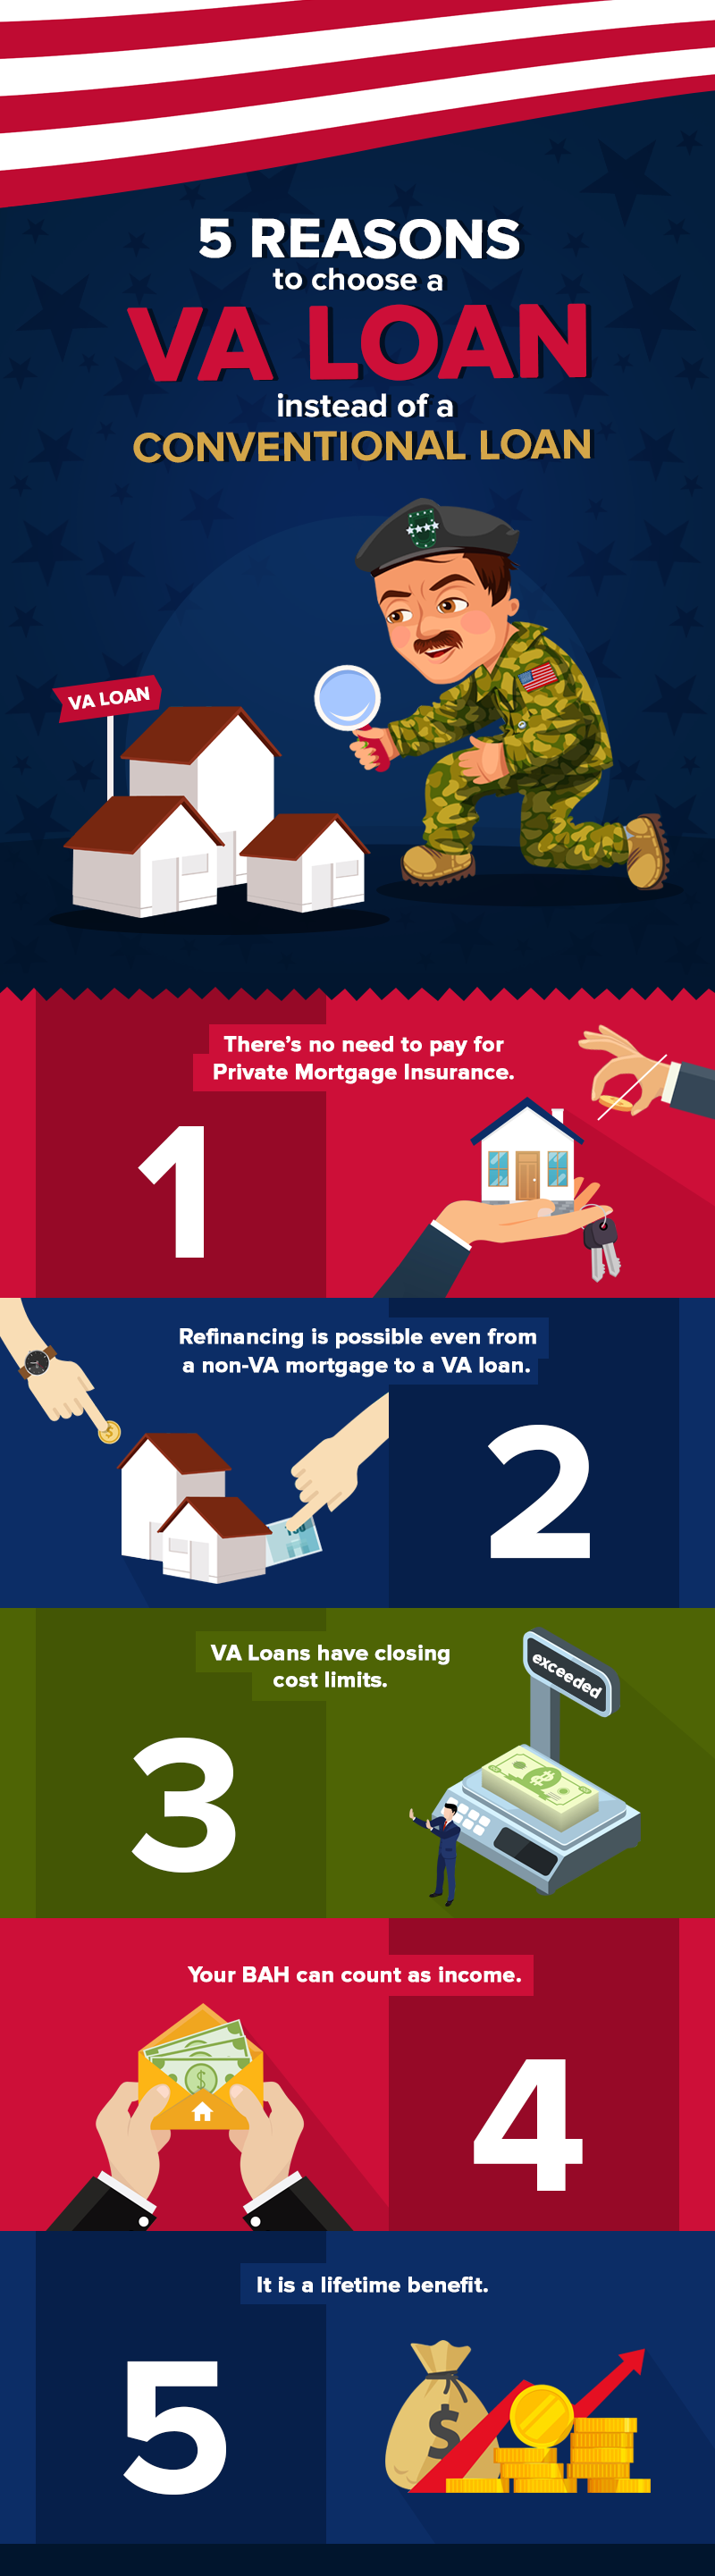 Military Home Buyers: 5 Reasons To Choose A VA Loan Instead of A Conventional Loan